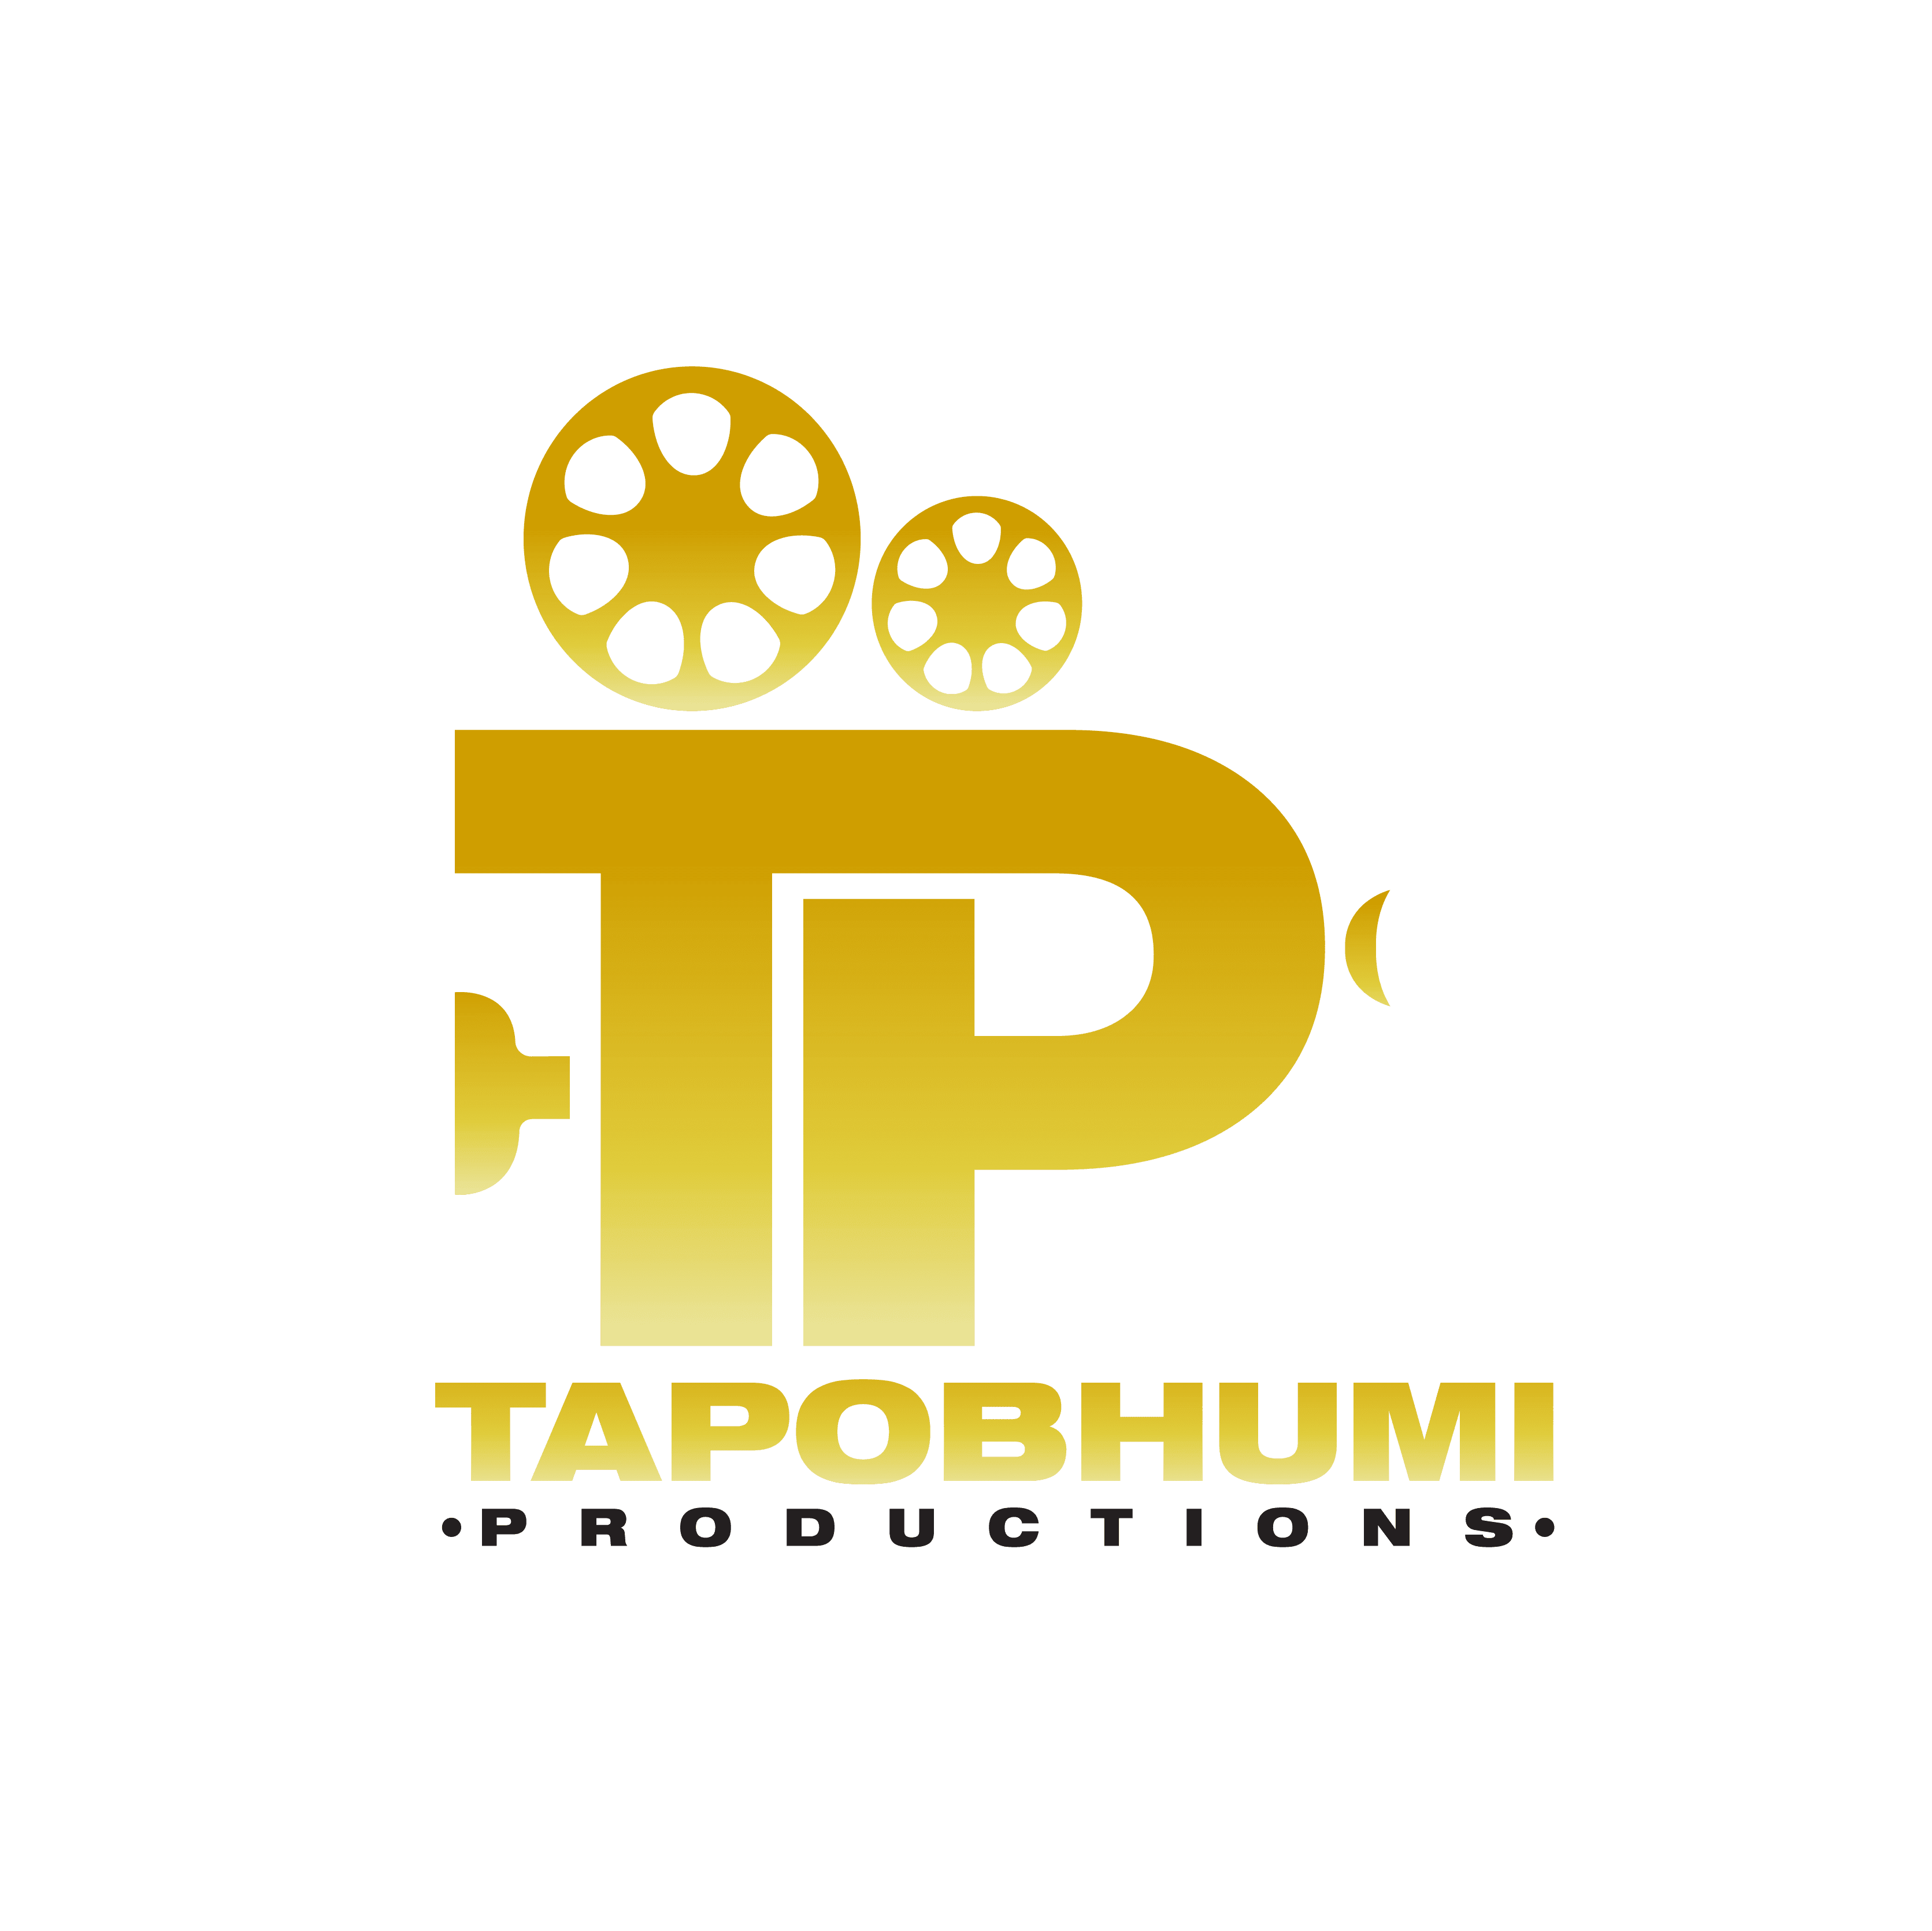 TAPOBHUMI PRODUCTIONS